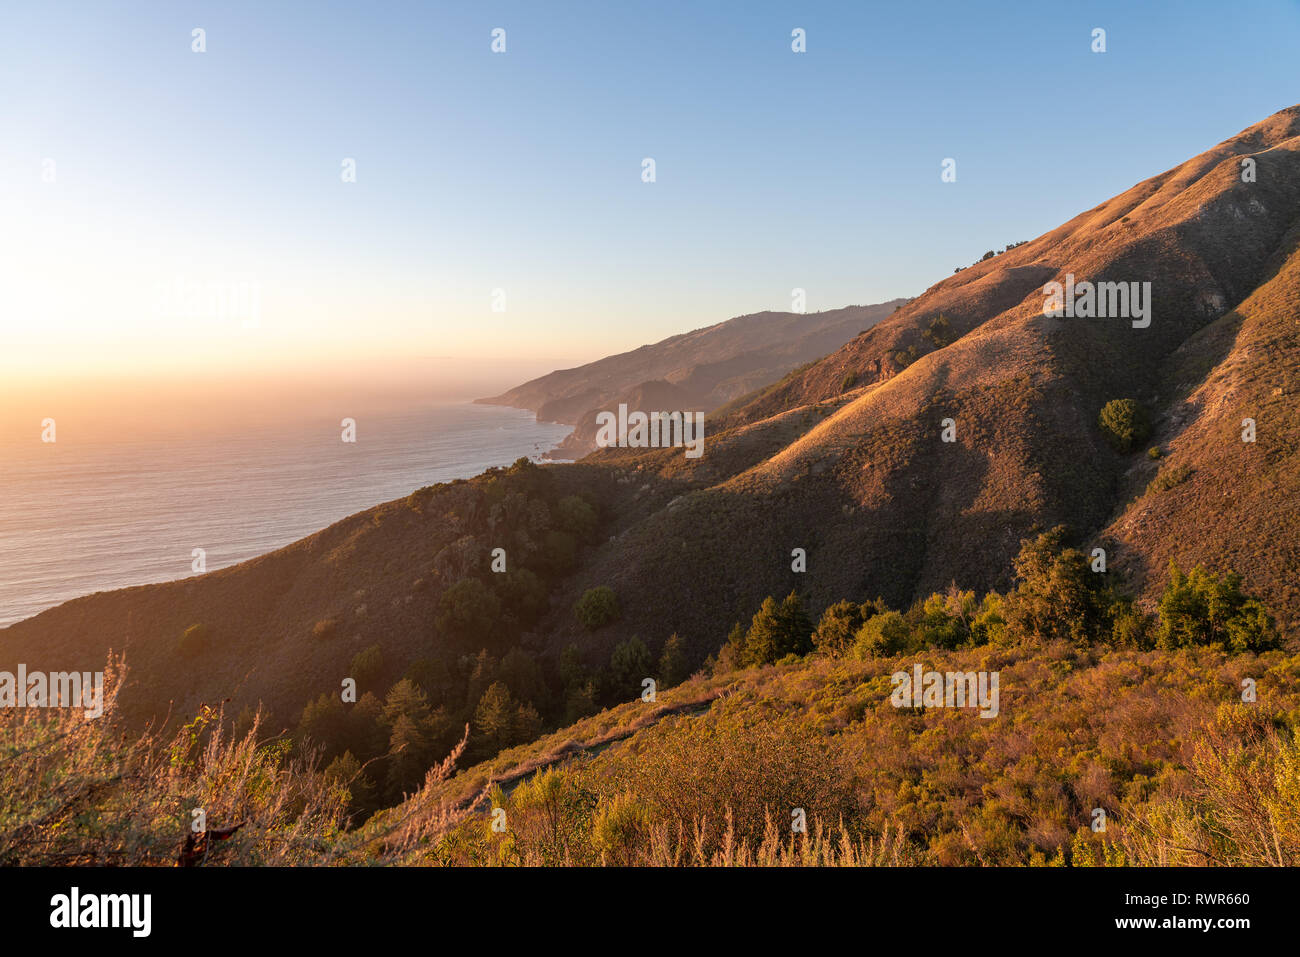 Big Sur, California - Scenic overlook off sunset on the hills along the Pacific Coast. Stock Photo